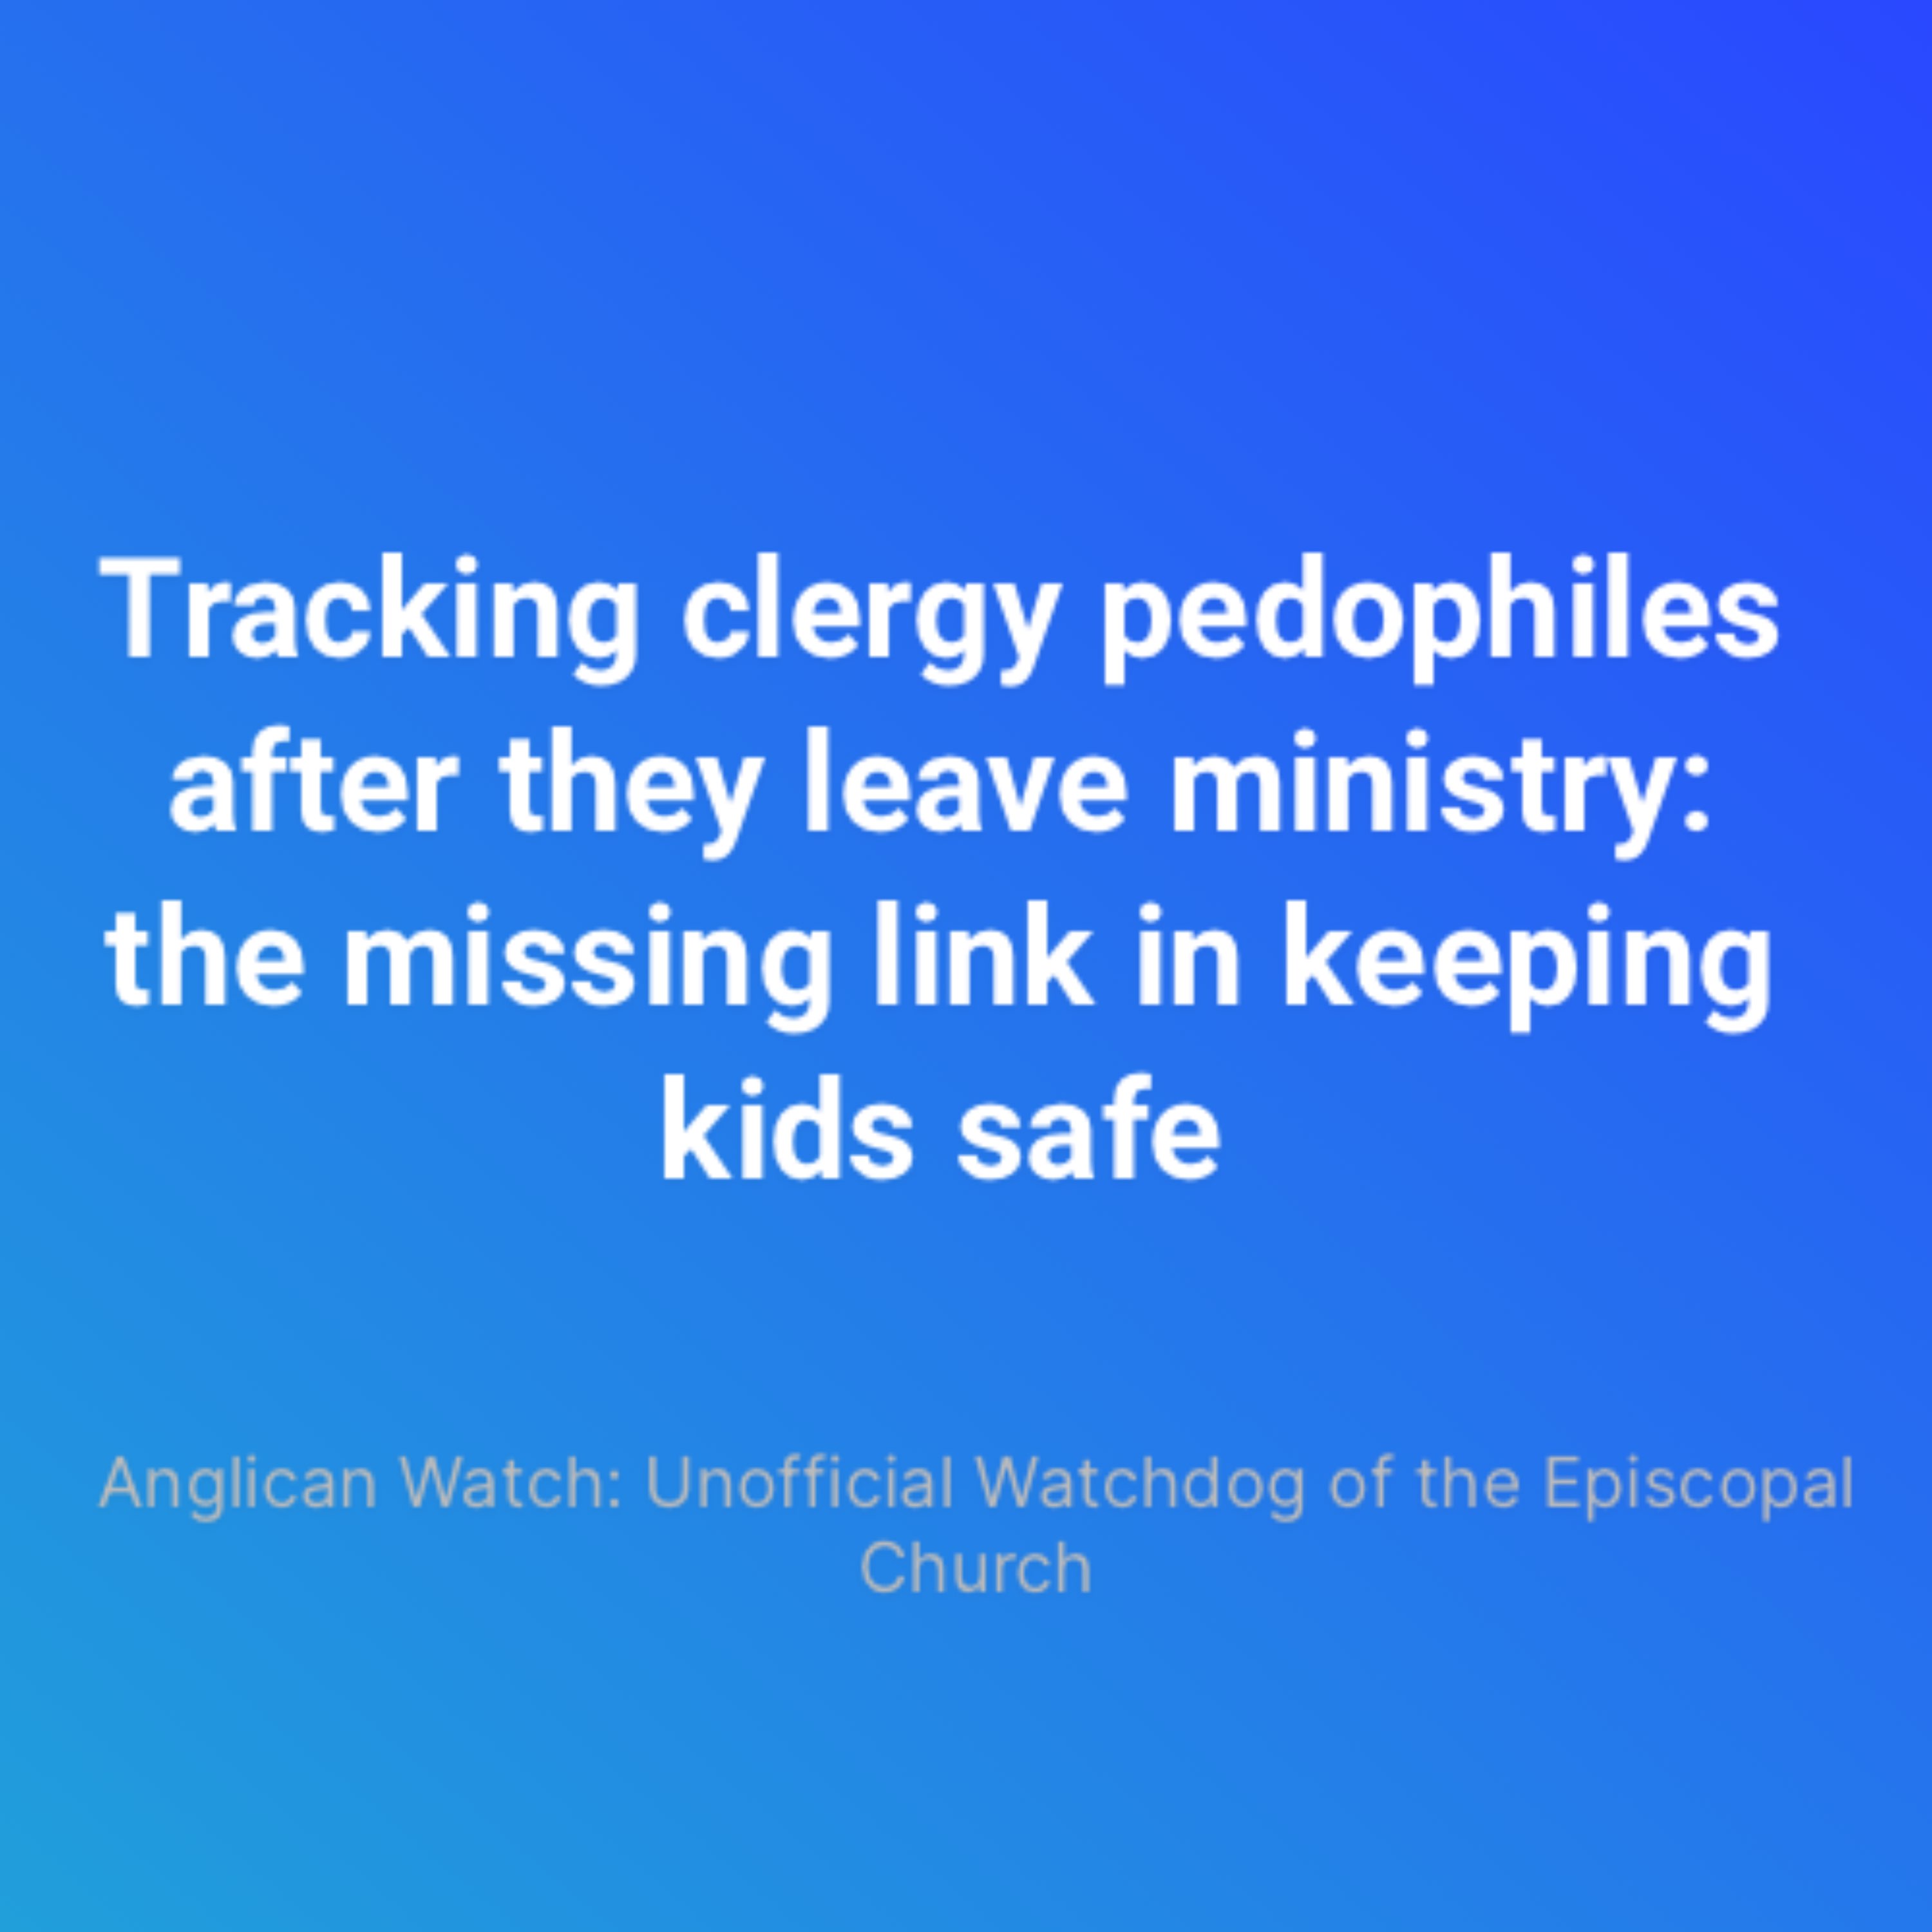 Tracking clergy pedophiles after they leave ministry: the missing link in keeping kids safe